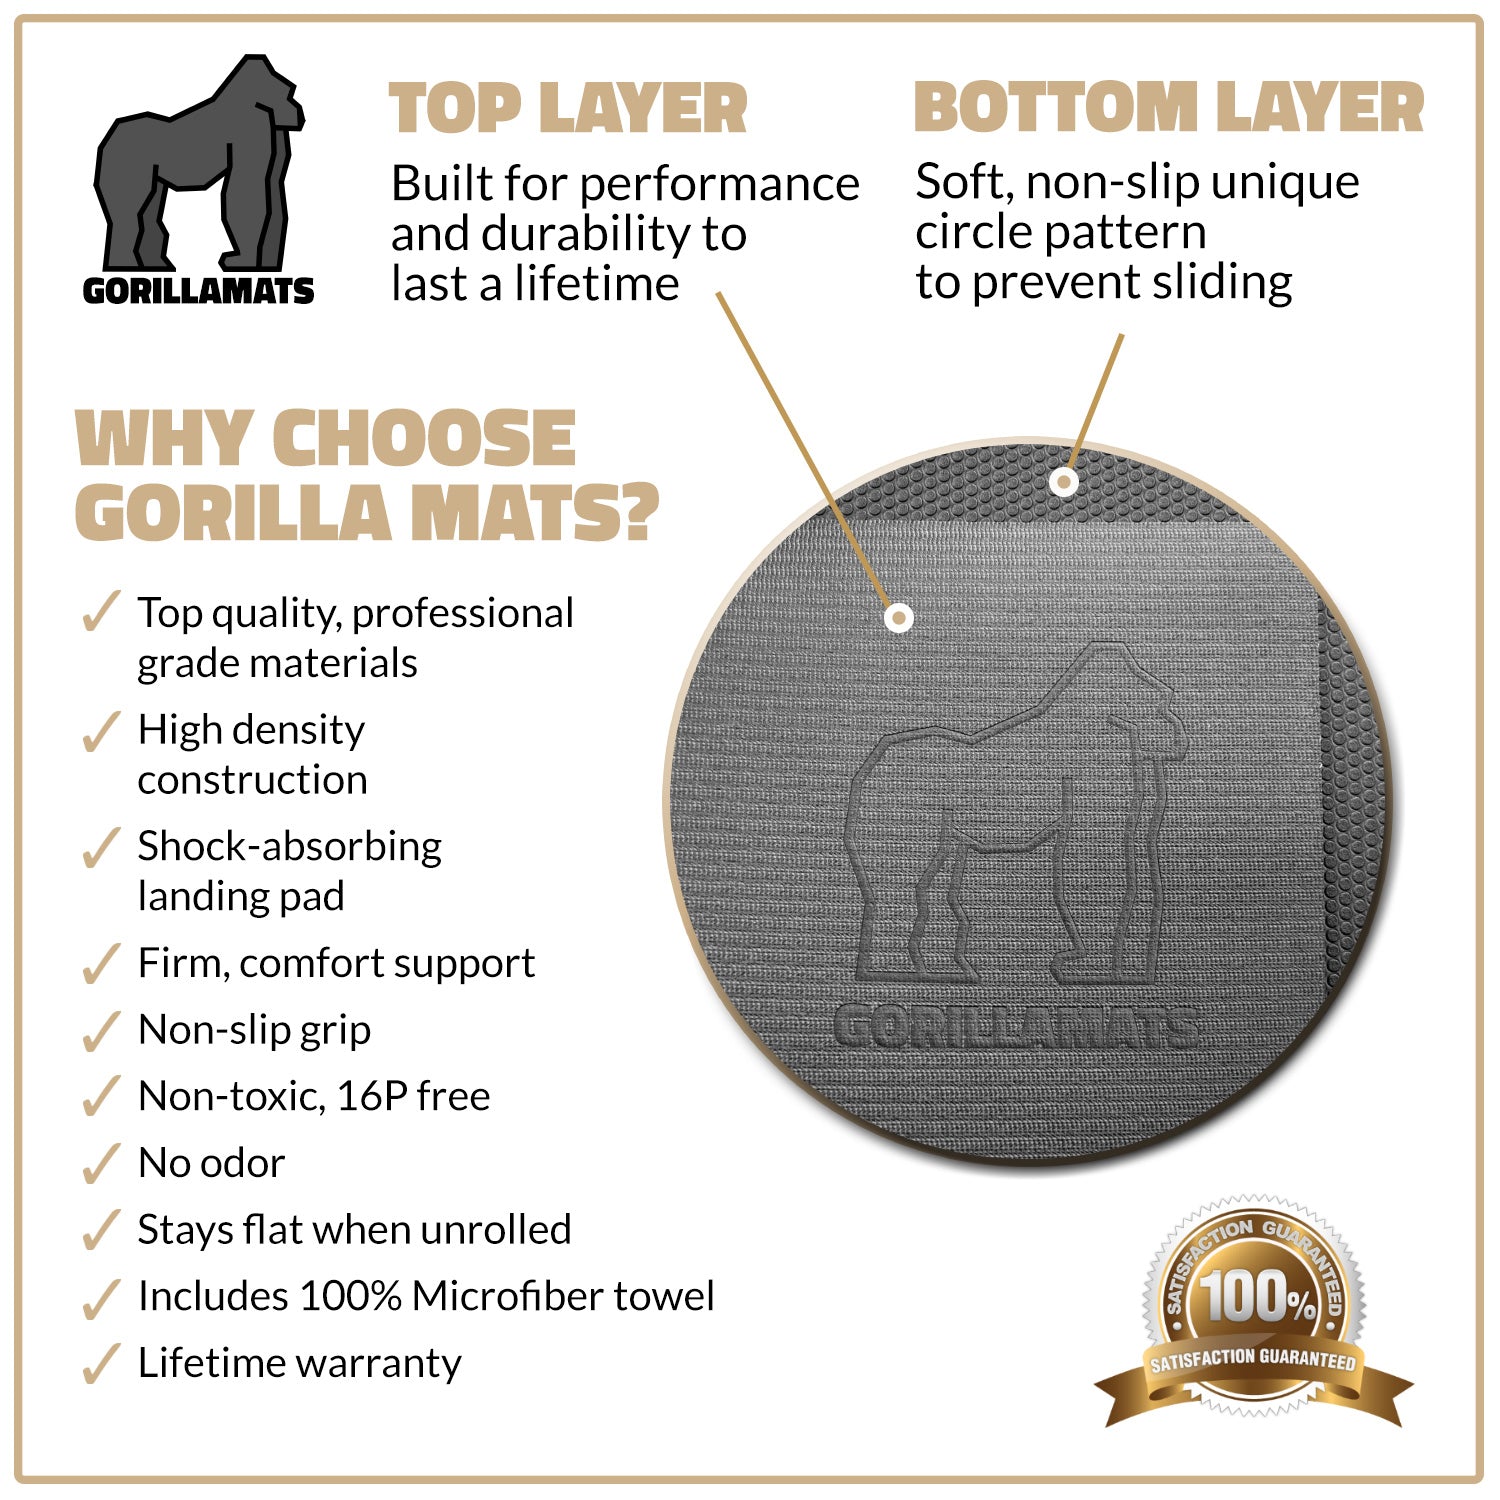  Gorilla Mats Premium Extra Large Yoga Mat – 9' x 6' x 8mm  Extra Thick & Ultra Comfortable, Non-Toxic, Non-Slip Barefoot Exercise Mat  – Works Great on Any Floor for